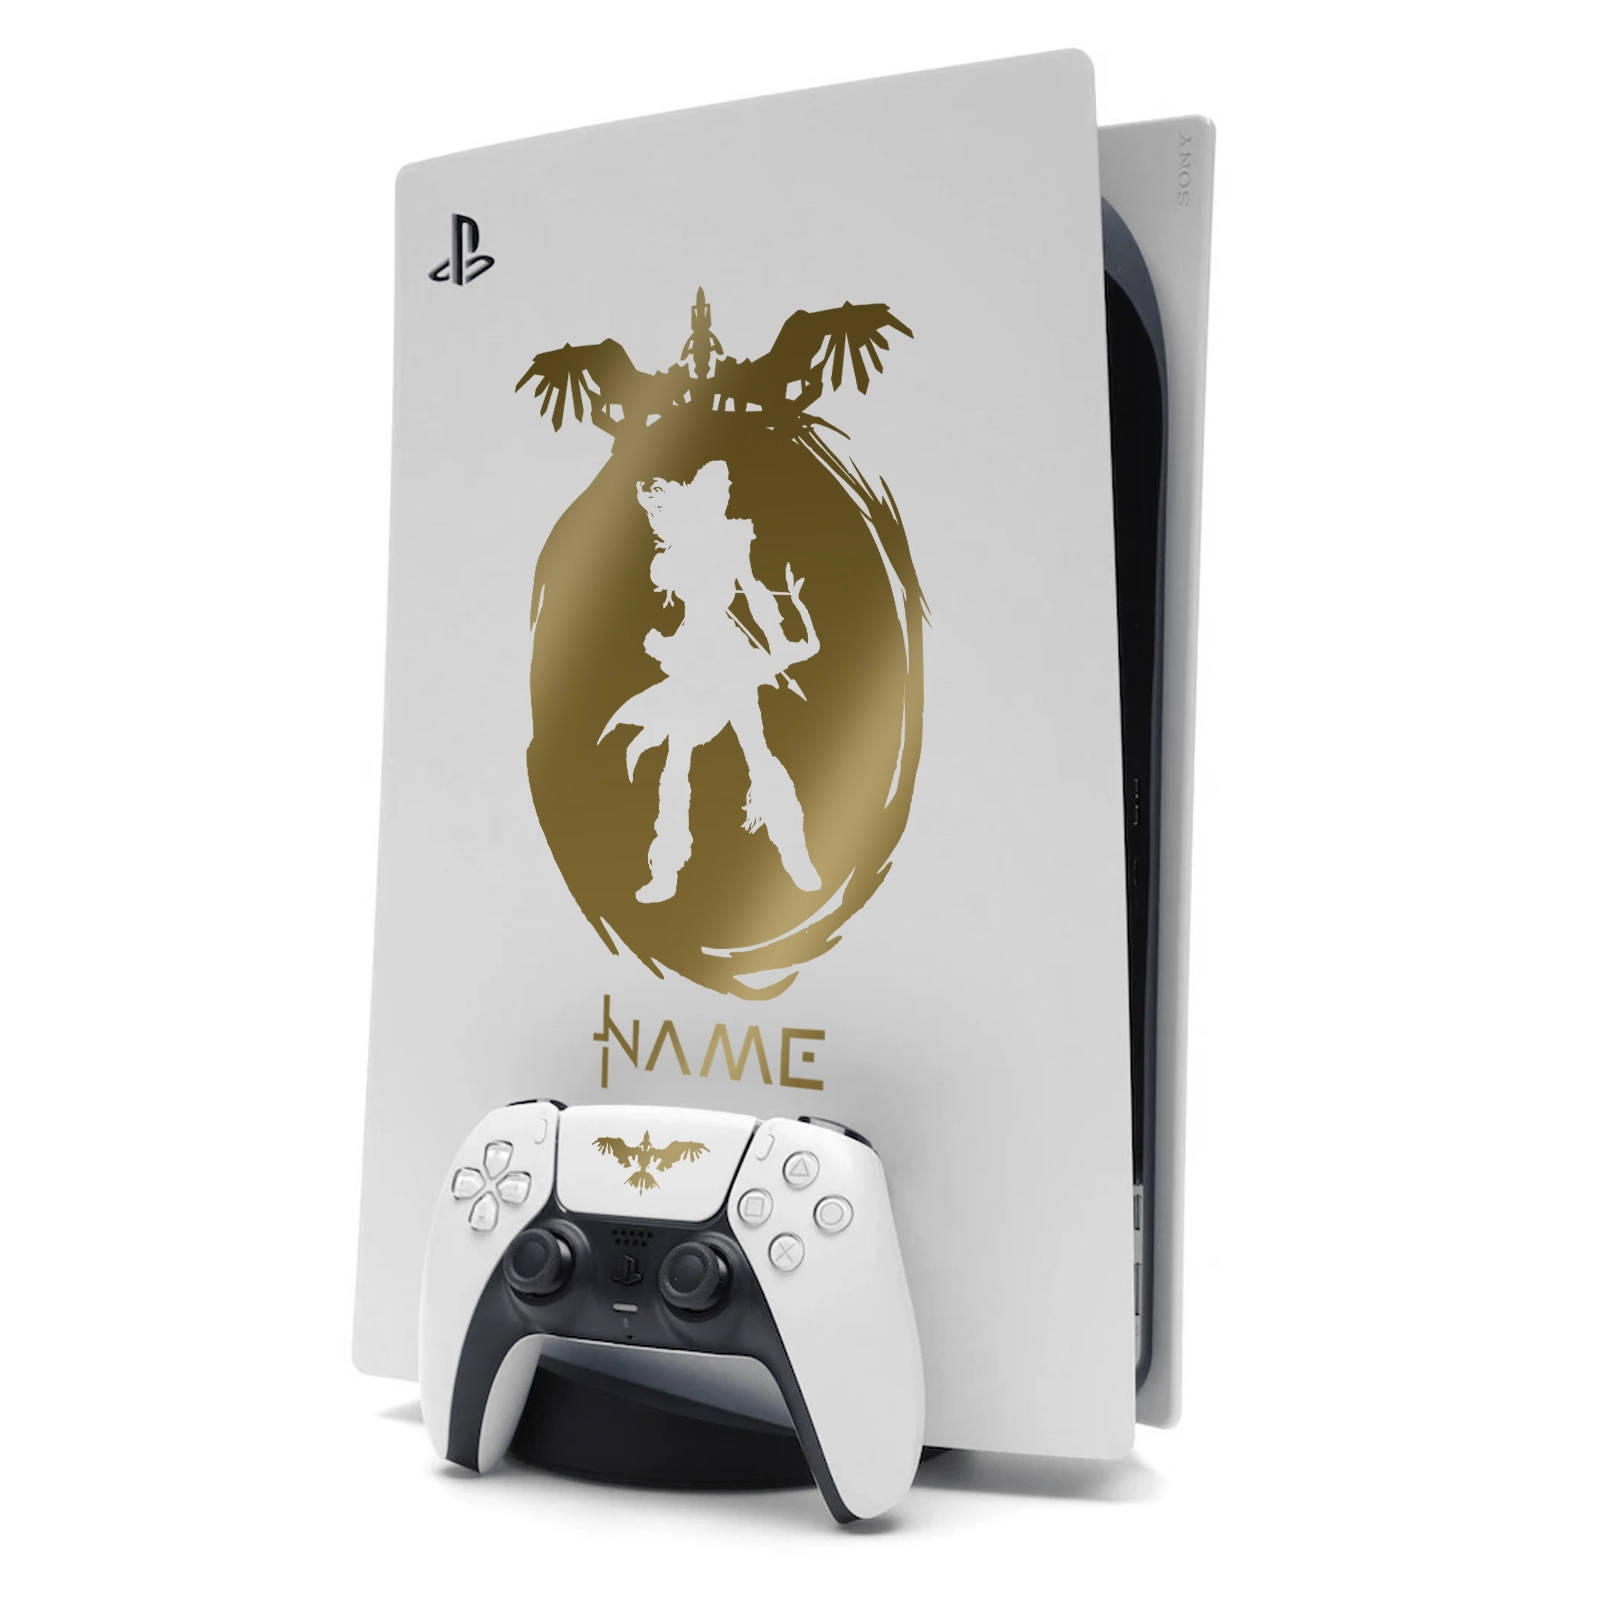 Horizon Aloy PS5 Sticker Skin for Playstation 5 in Gold